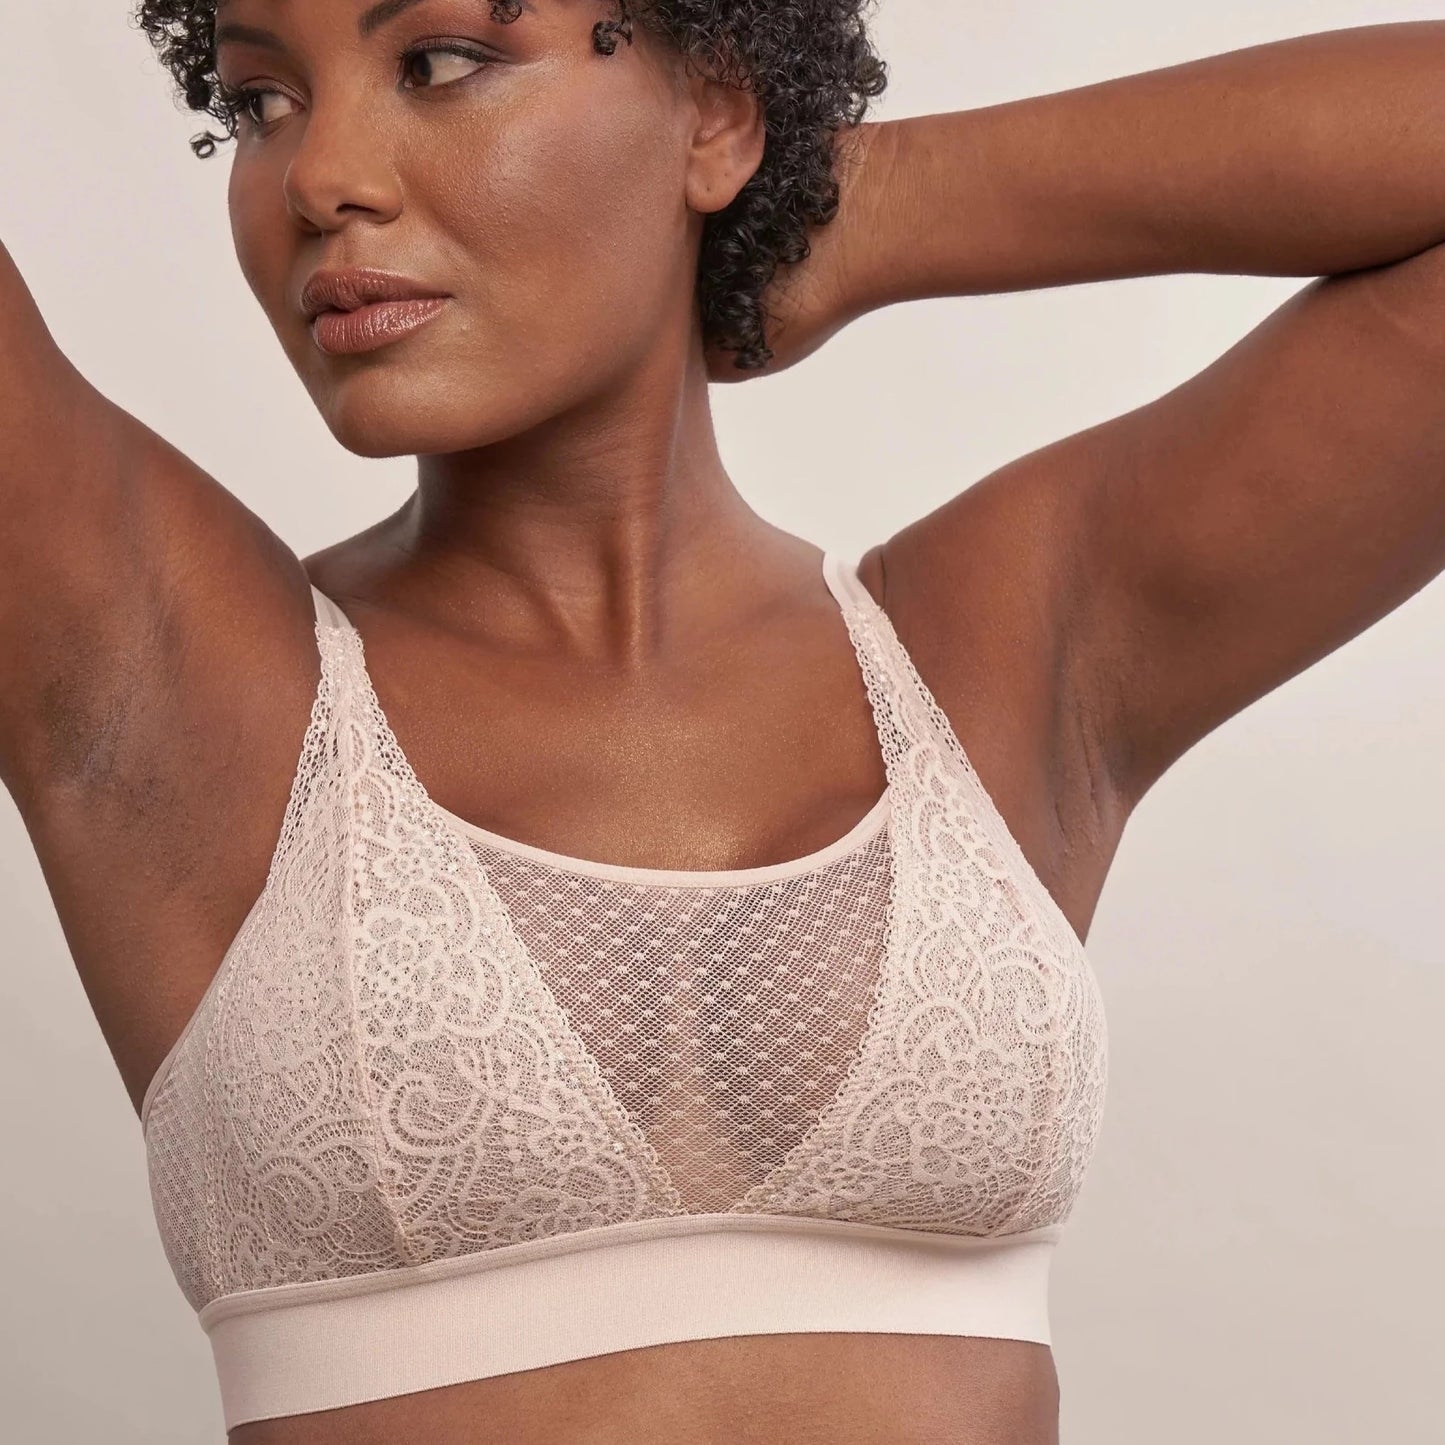 Maggie Lace Bralette in Champagne | AnaOno | Soft post-surgery bras made just for those affected by breast cancer, breast surgeries or discomfort.